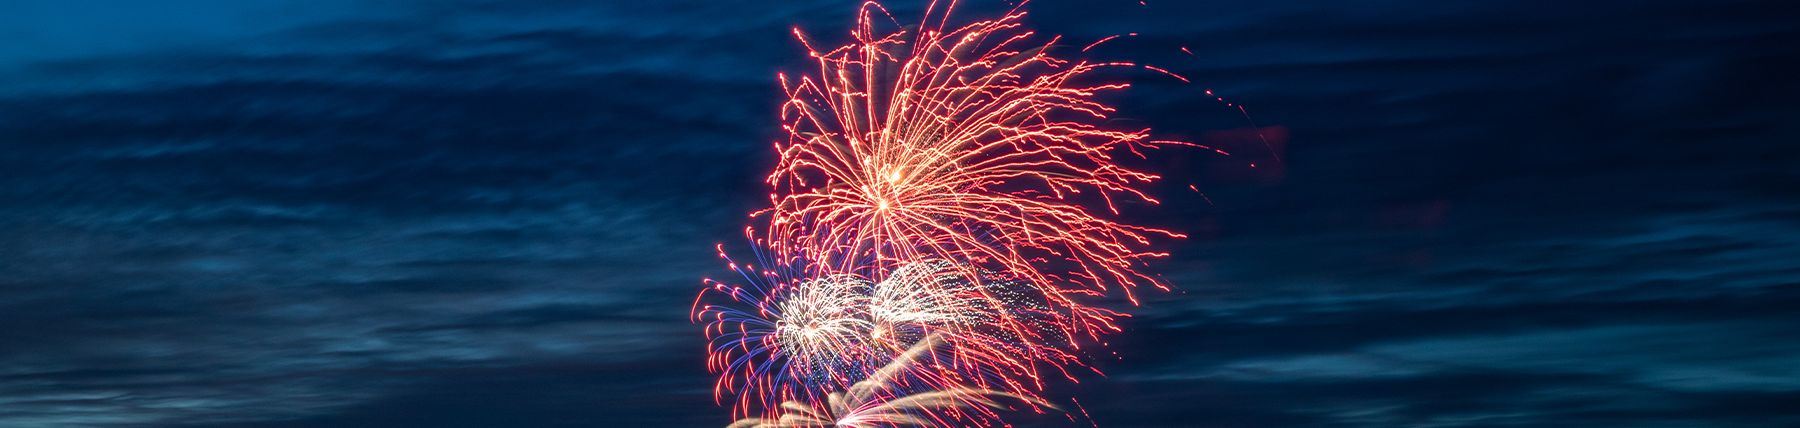 Where to Celebrate New Years on Nantucket